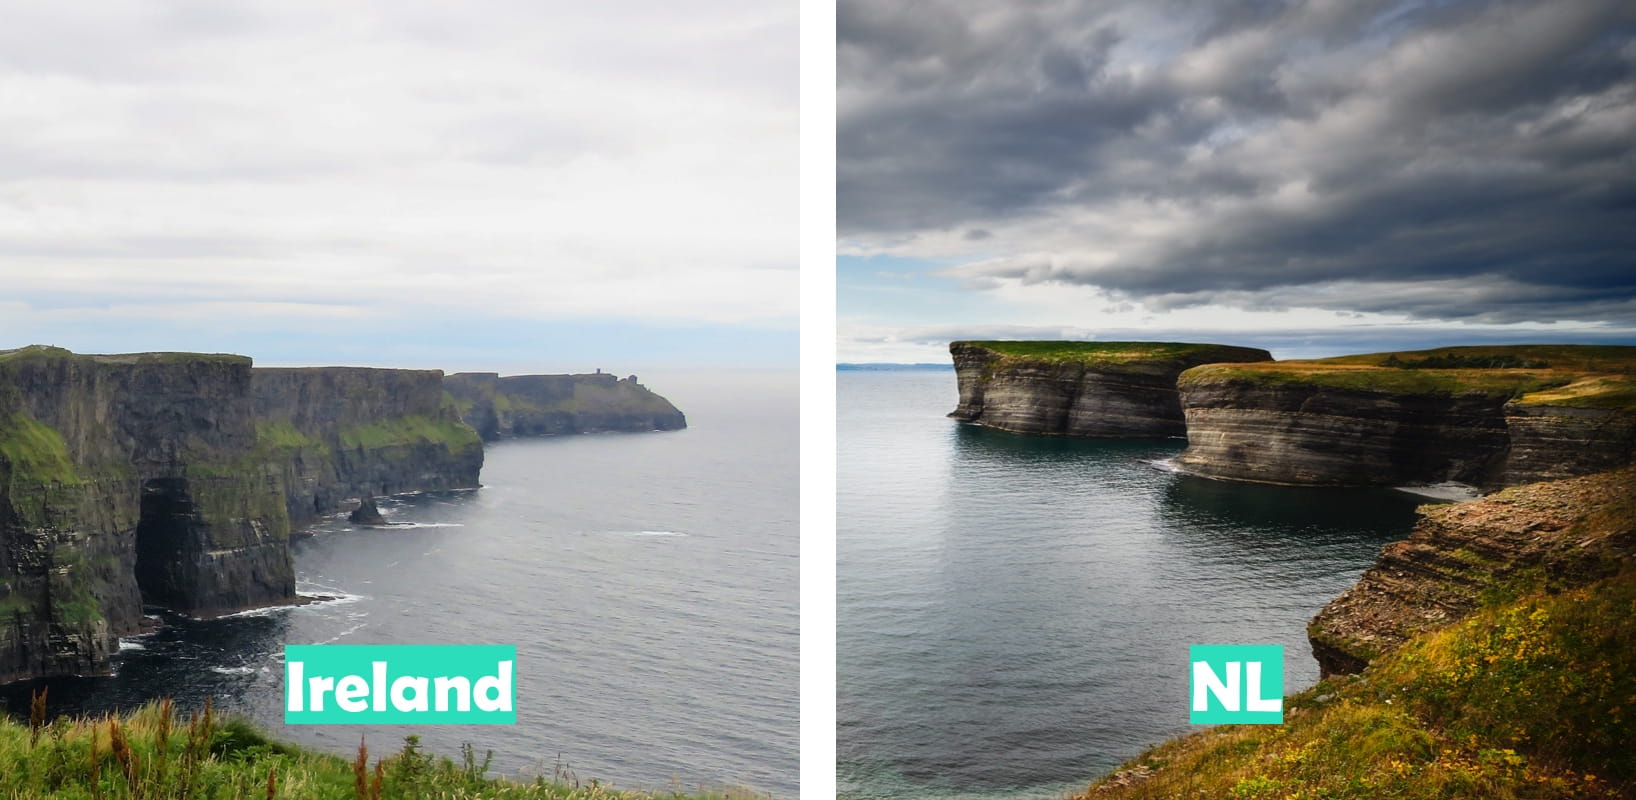 Ireland (Cliffs of Moher pictured) vs Newfoundland & Labrador (Bell Island pictured)